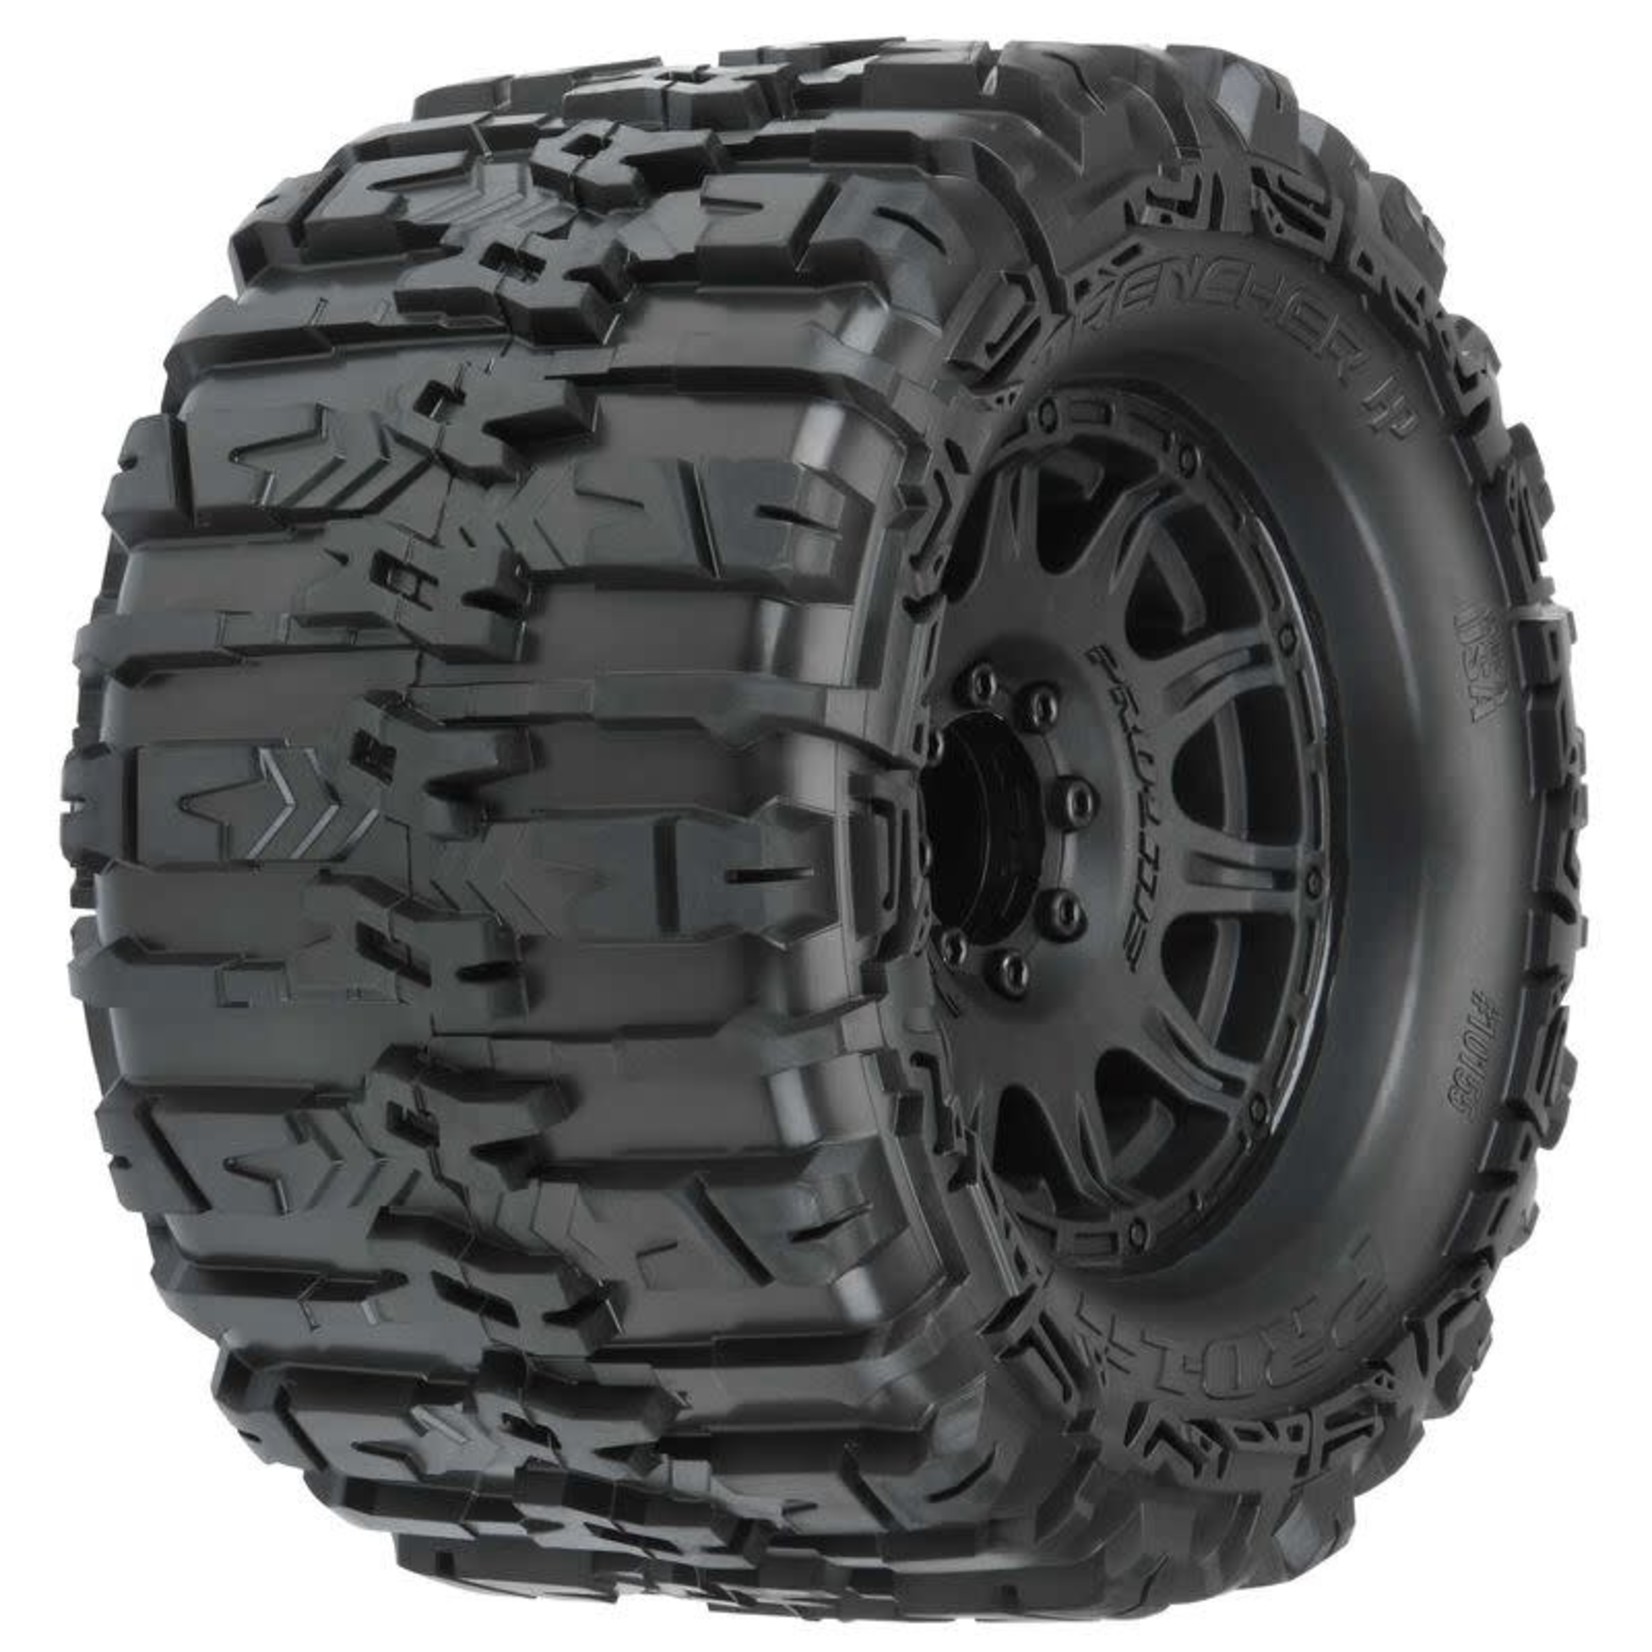 Pro-line Racing PRO1015510 Pro-Line 1/8 Trencher HP BELTED F/R 3.8" MT Tires Mounted 17mm Black  Raid (2)